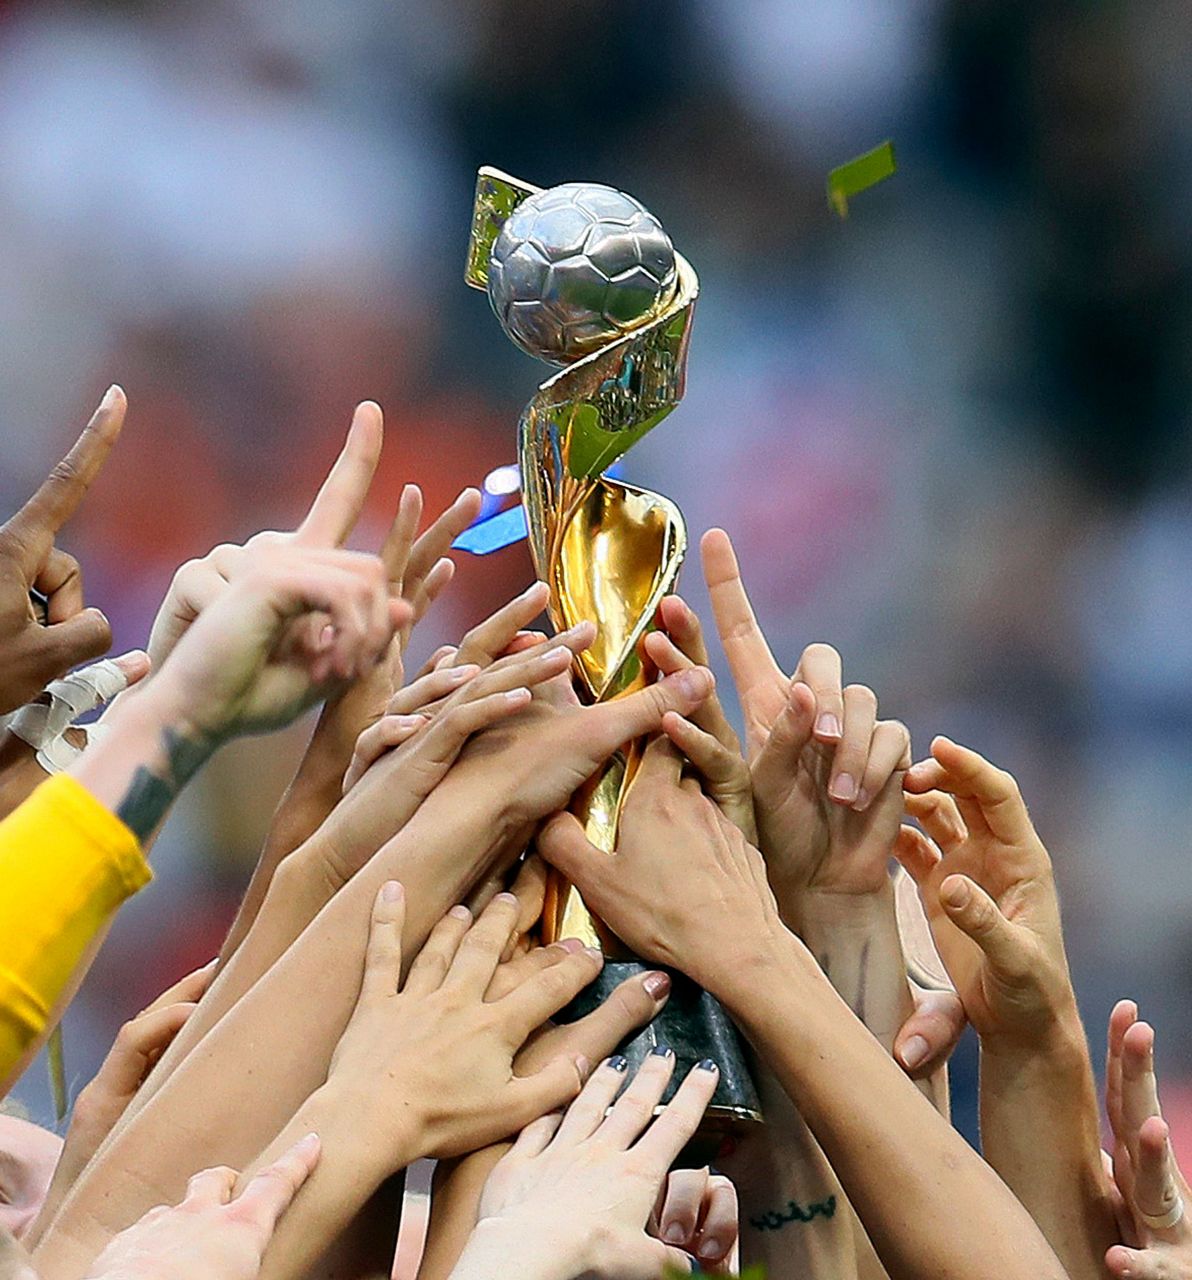 fifa-expands-women-s-world-cup-from-24-teams-to-32-for-2023